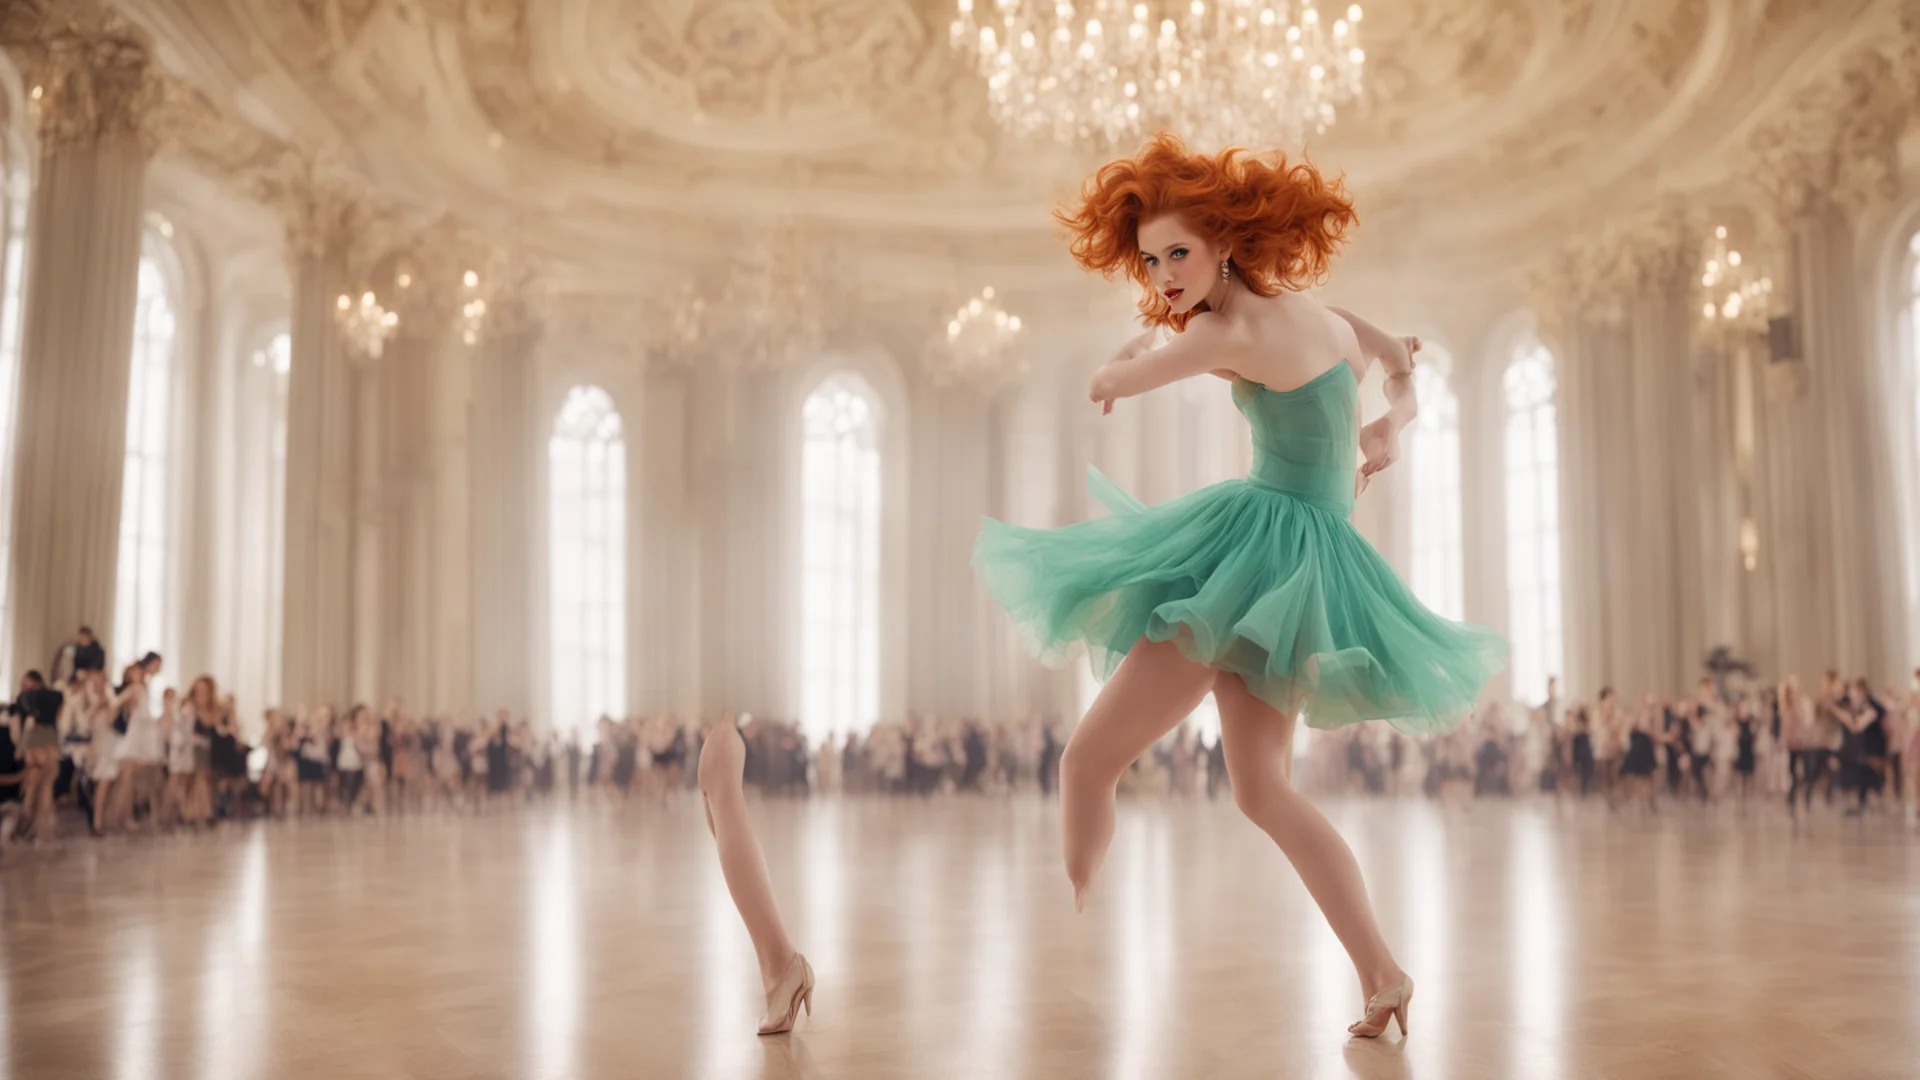 a ginger haired girl with short skirt dancing in a gigantic ballroom wide